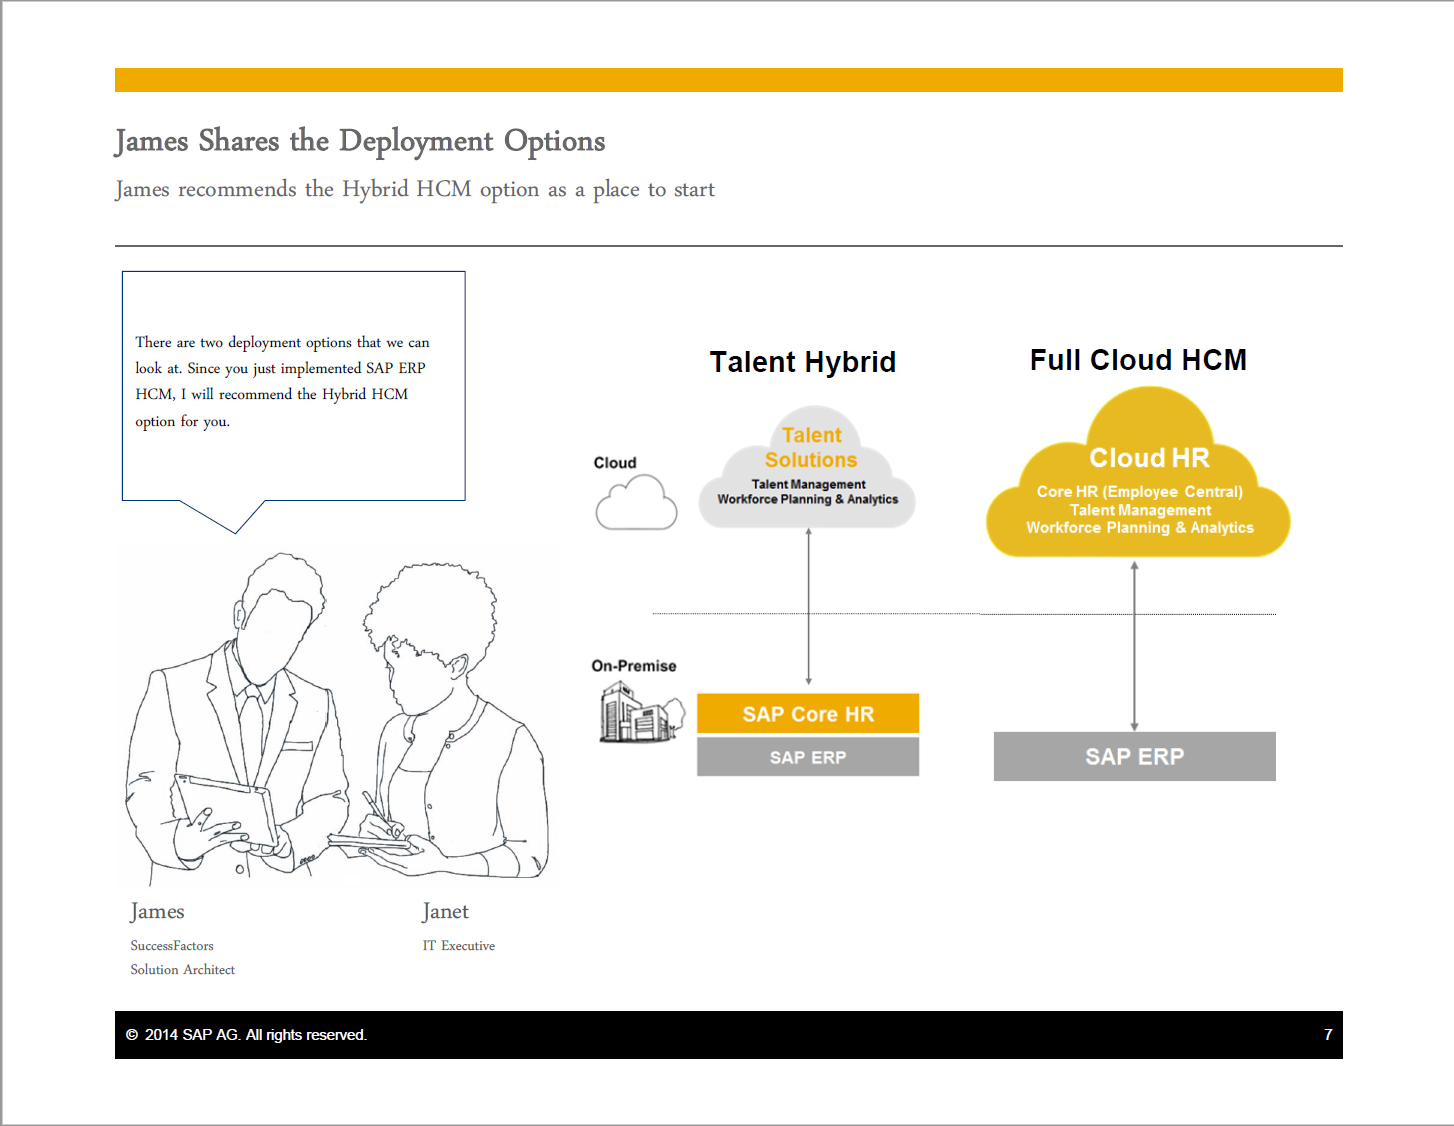 SAP created a new landscape model called the Talent Hybrid